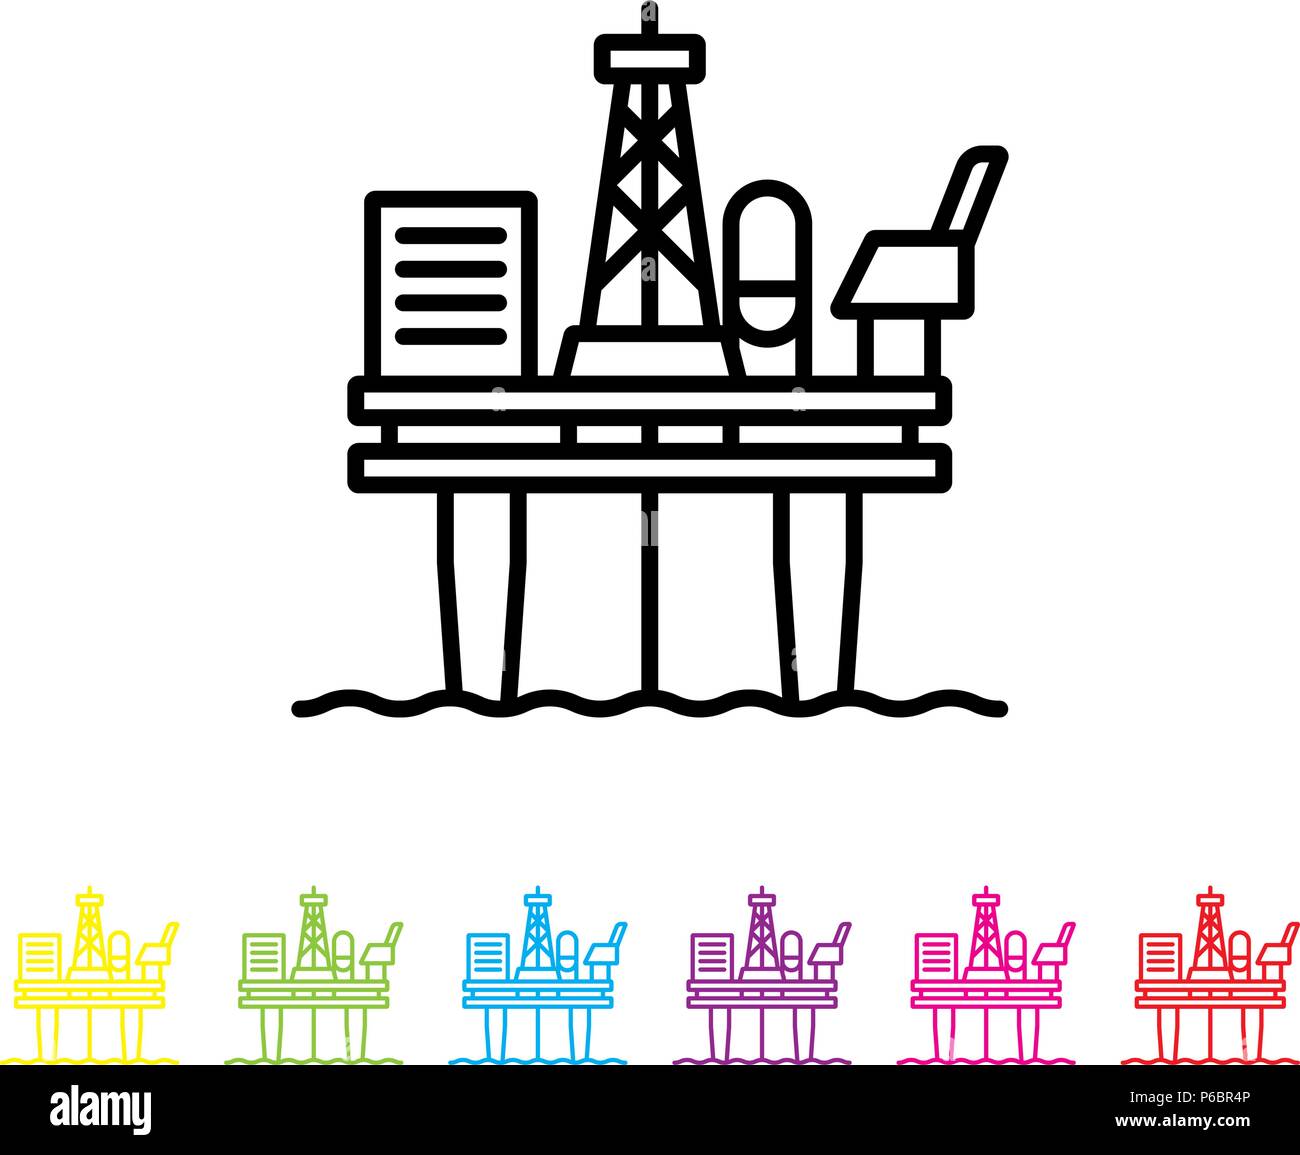 Offshore oil drilling platform line icon vector. Industry symbol. Stock Vector